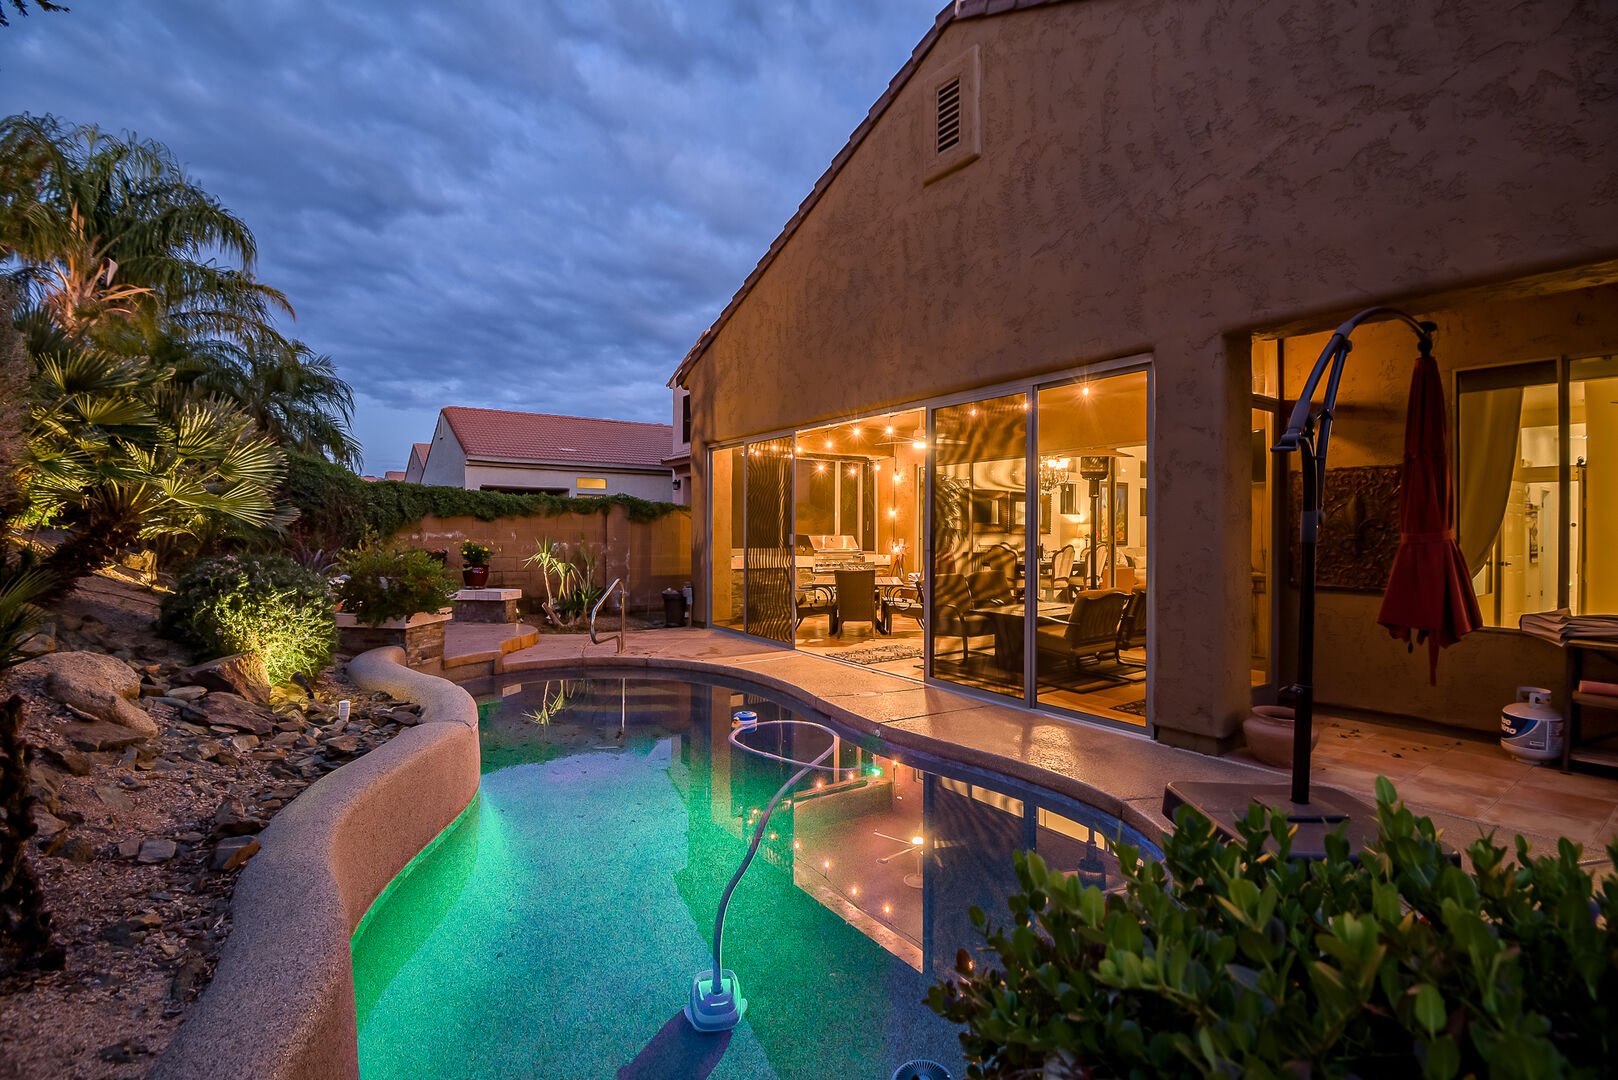 North Scottsdale Vacation Homes